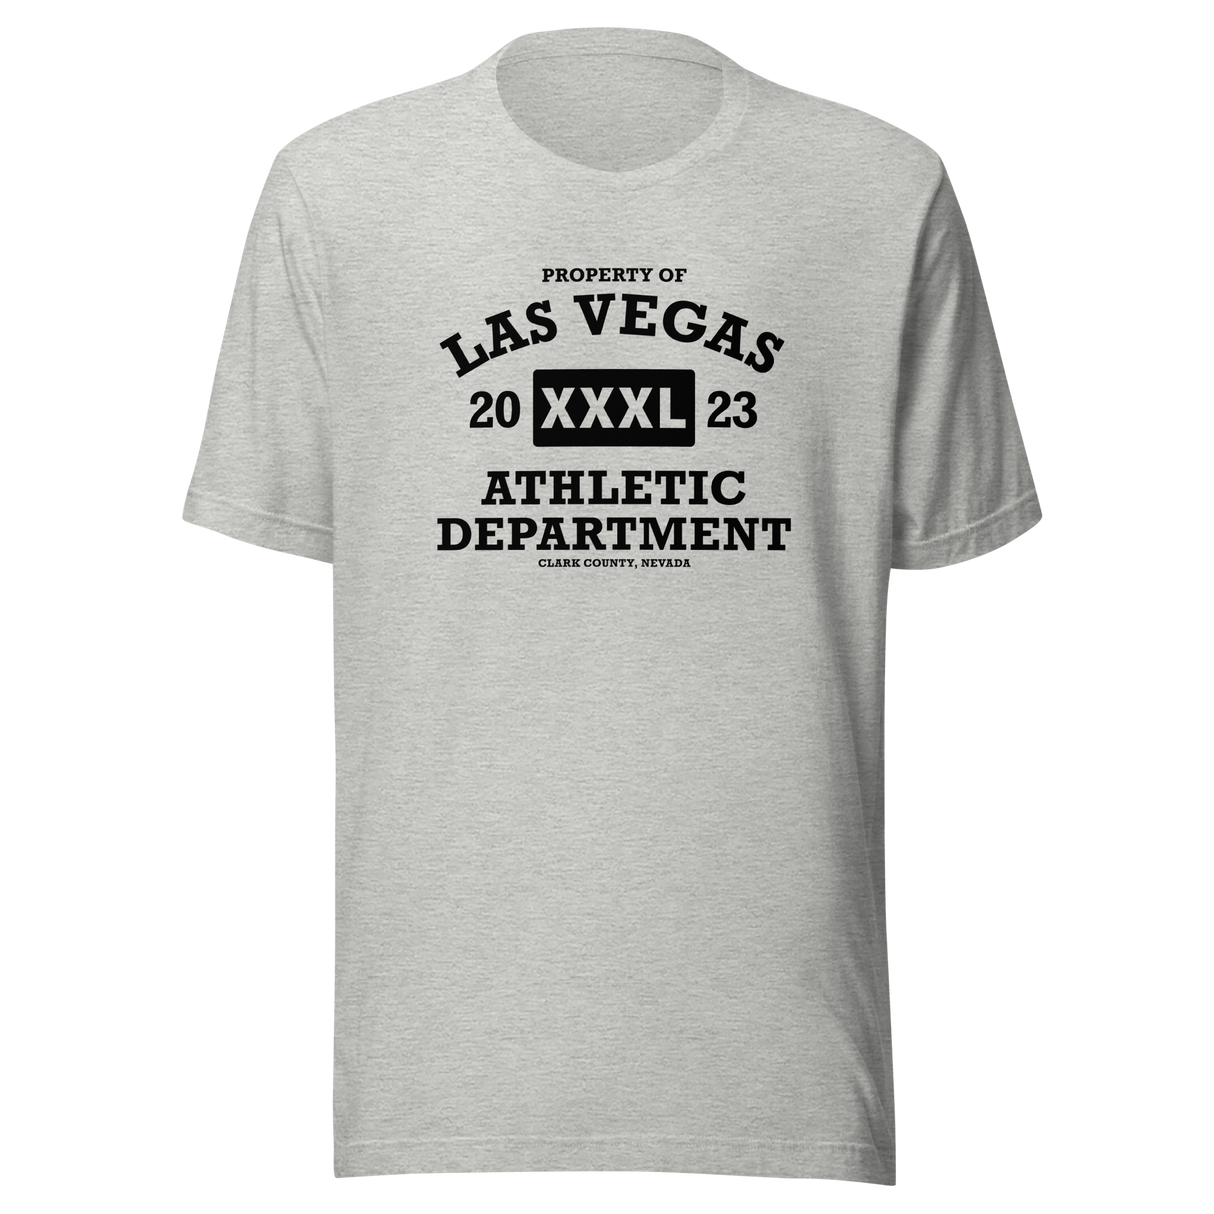 property-of-las-vegas-athletic-department-las-vegas-tee-nevada-t-shirt-fitness-tee-gym-t-shirt-workout-tee#color_athletic-heather